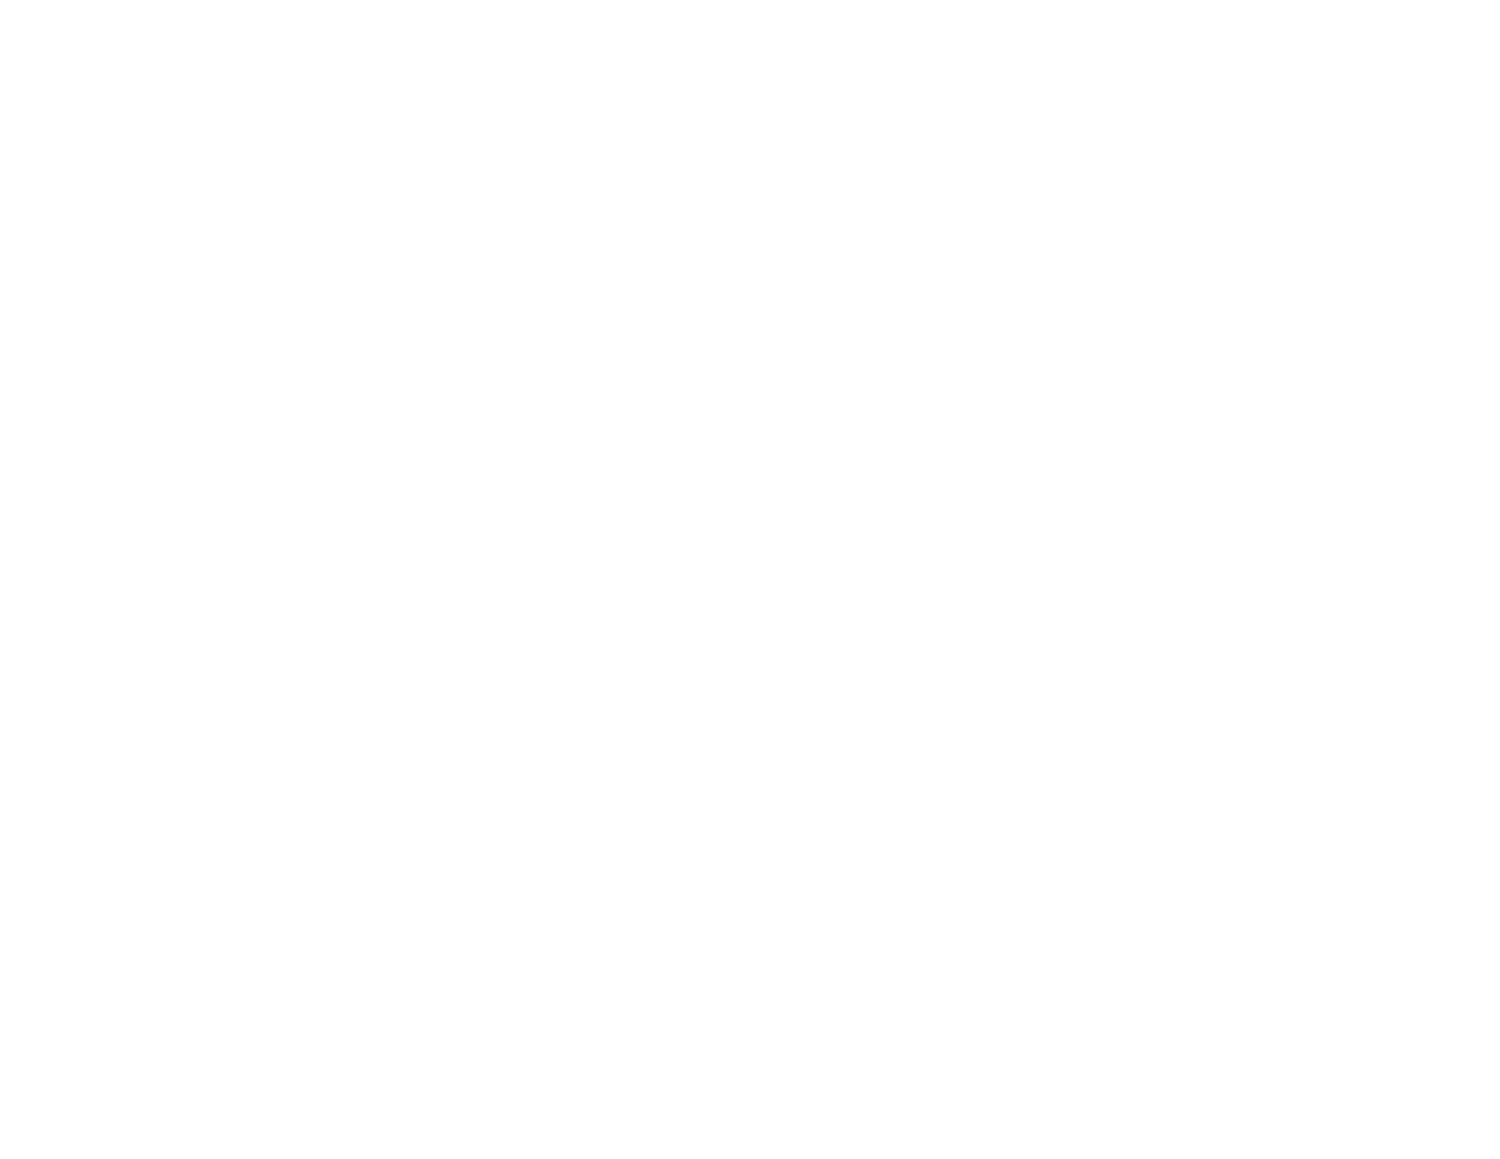 Every Nation Marseille